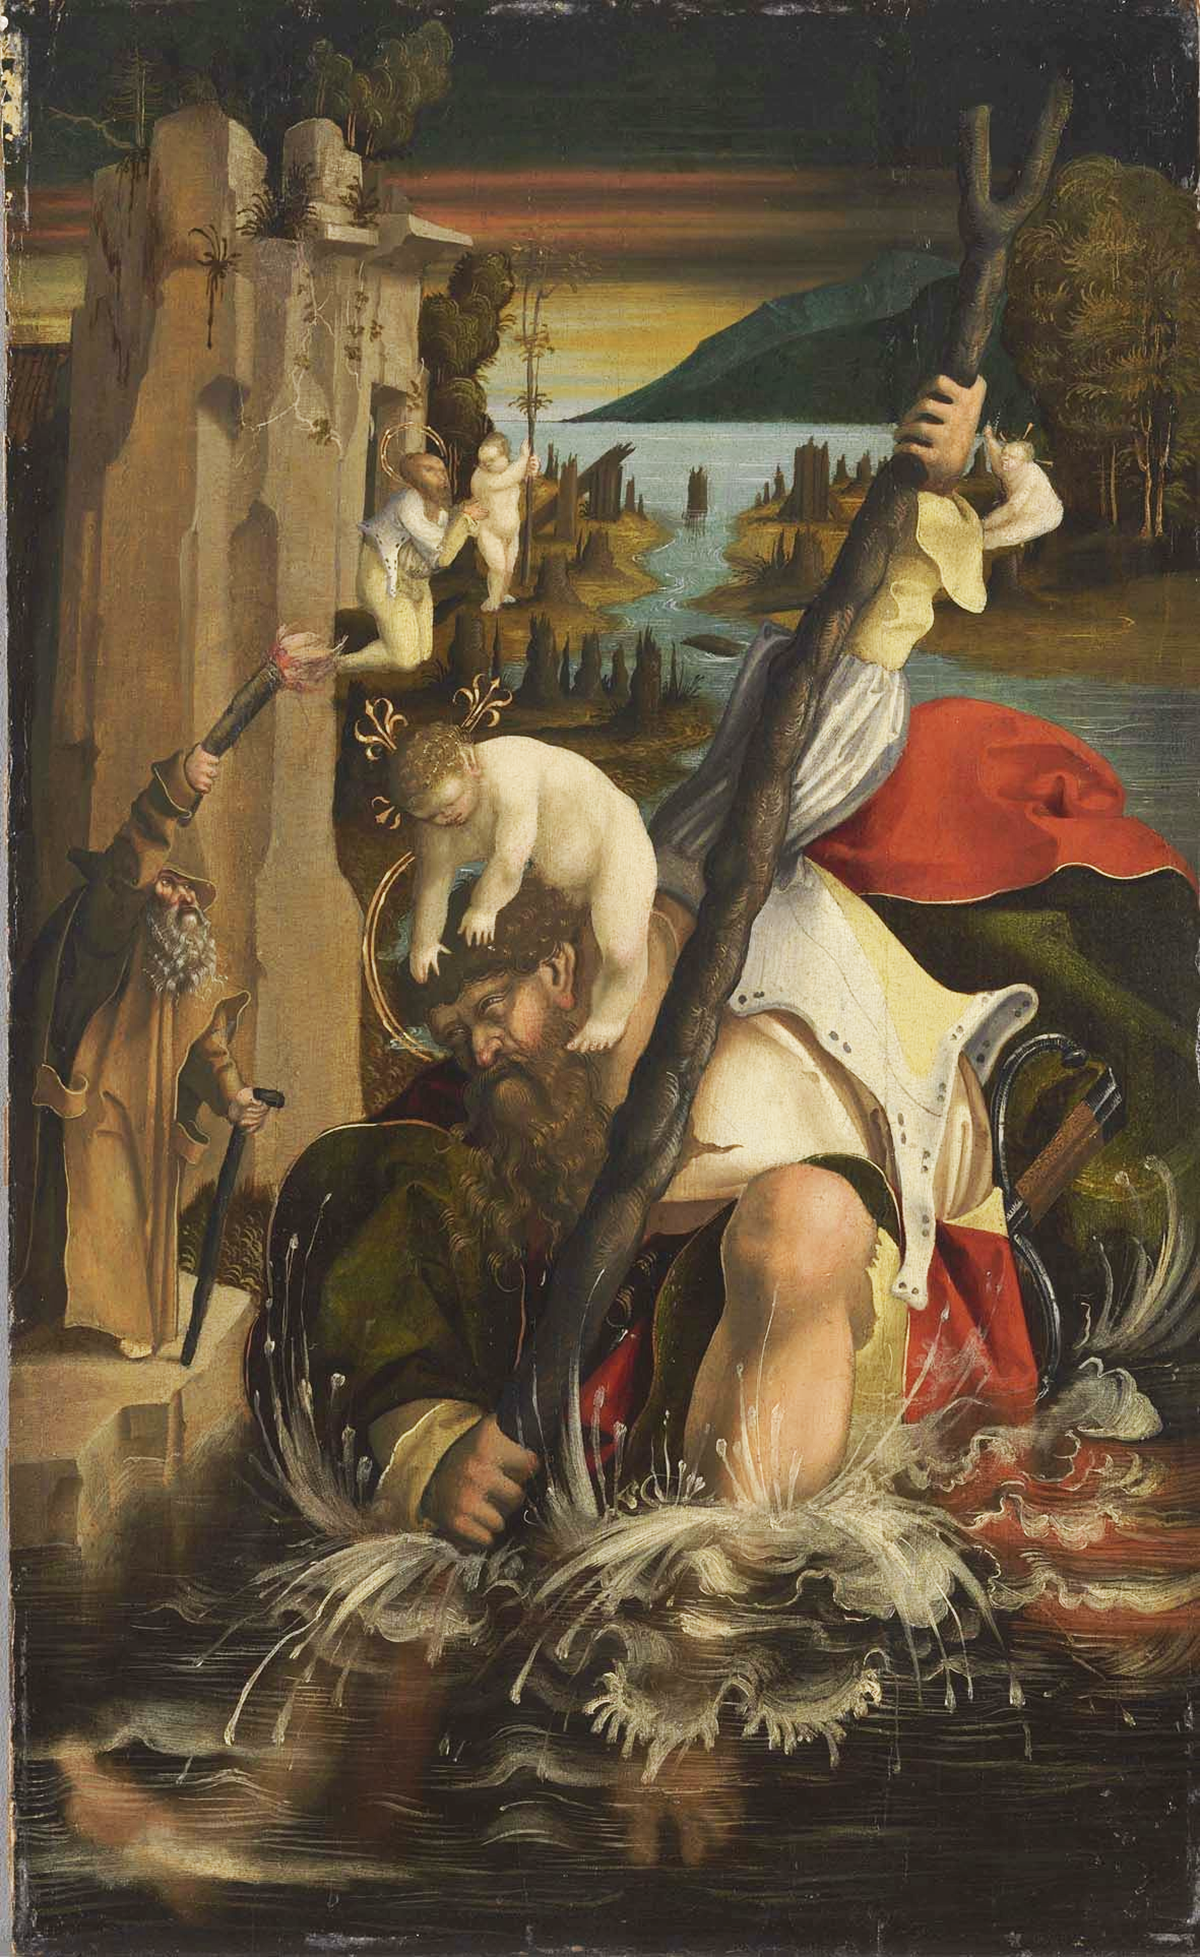 Saving St Christopher: The History of a Looted Painting, International  Journal of Cultural Property